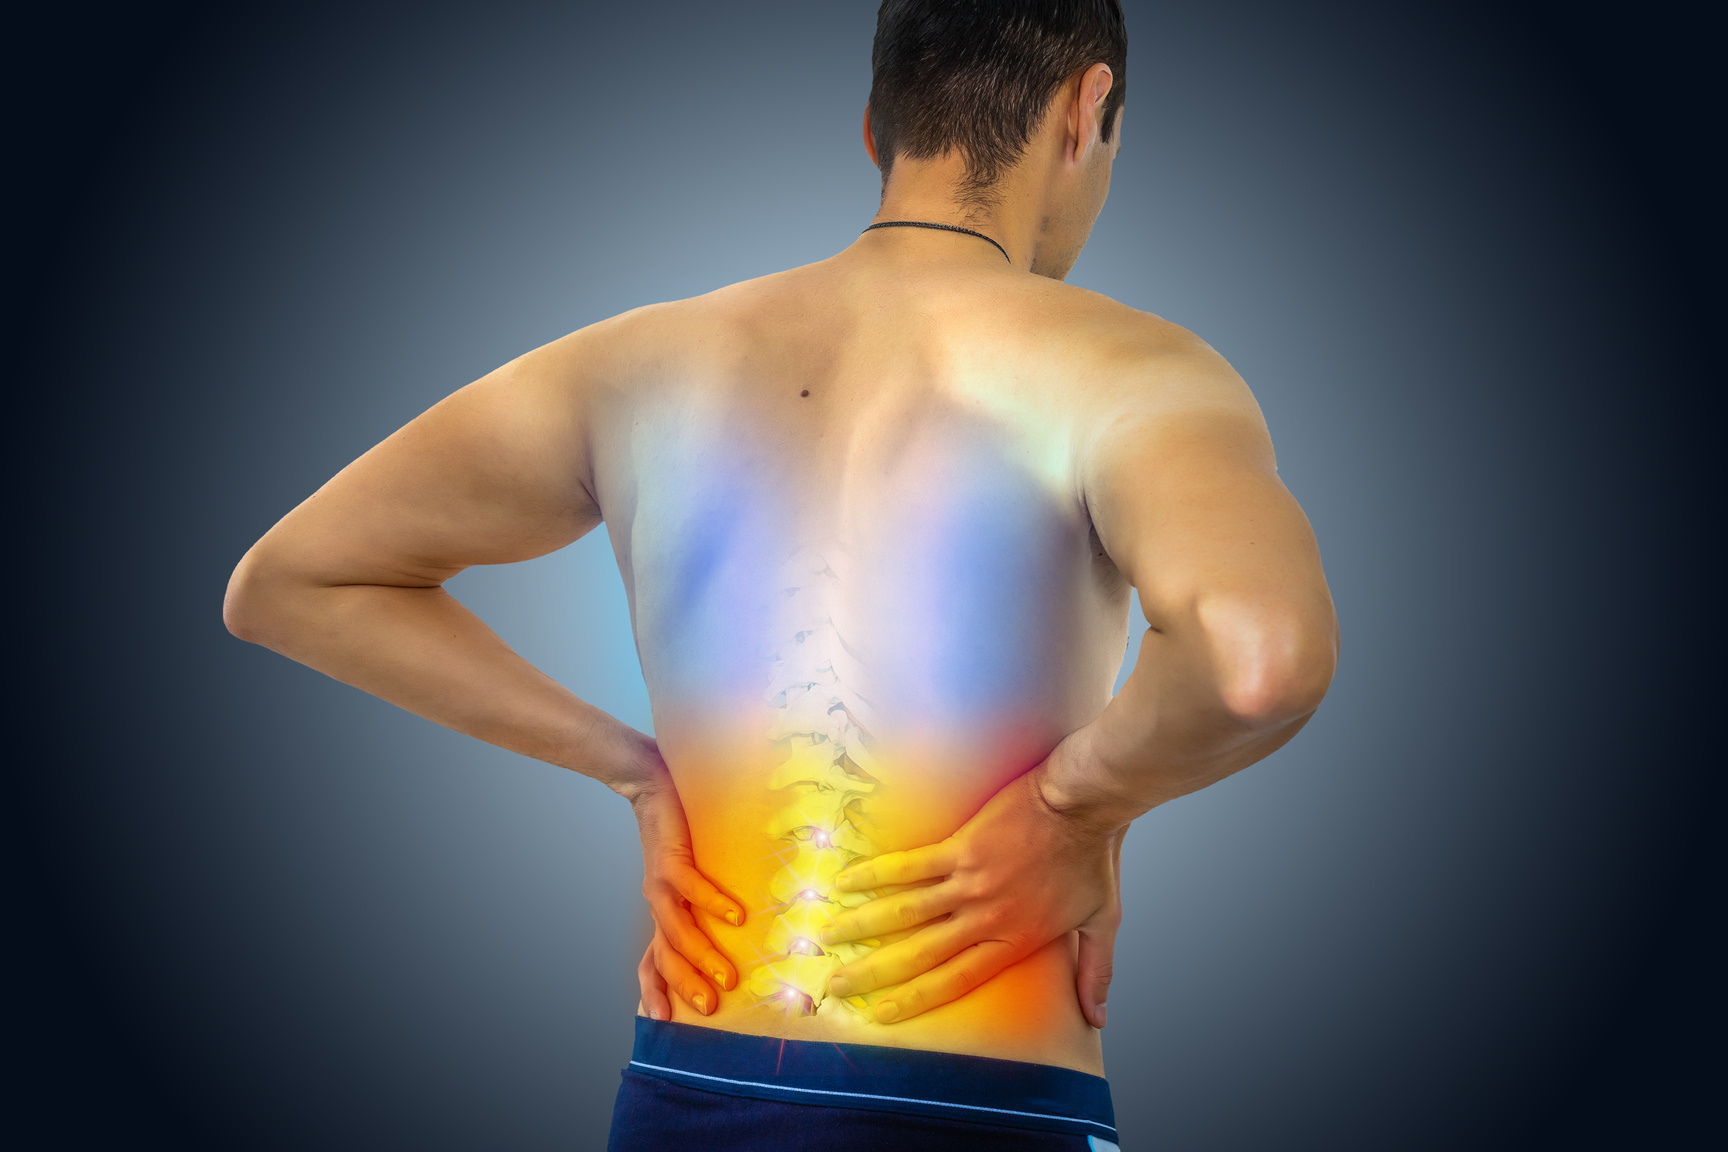 Lower back pain. Man holding his back in pain. Medical concept.